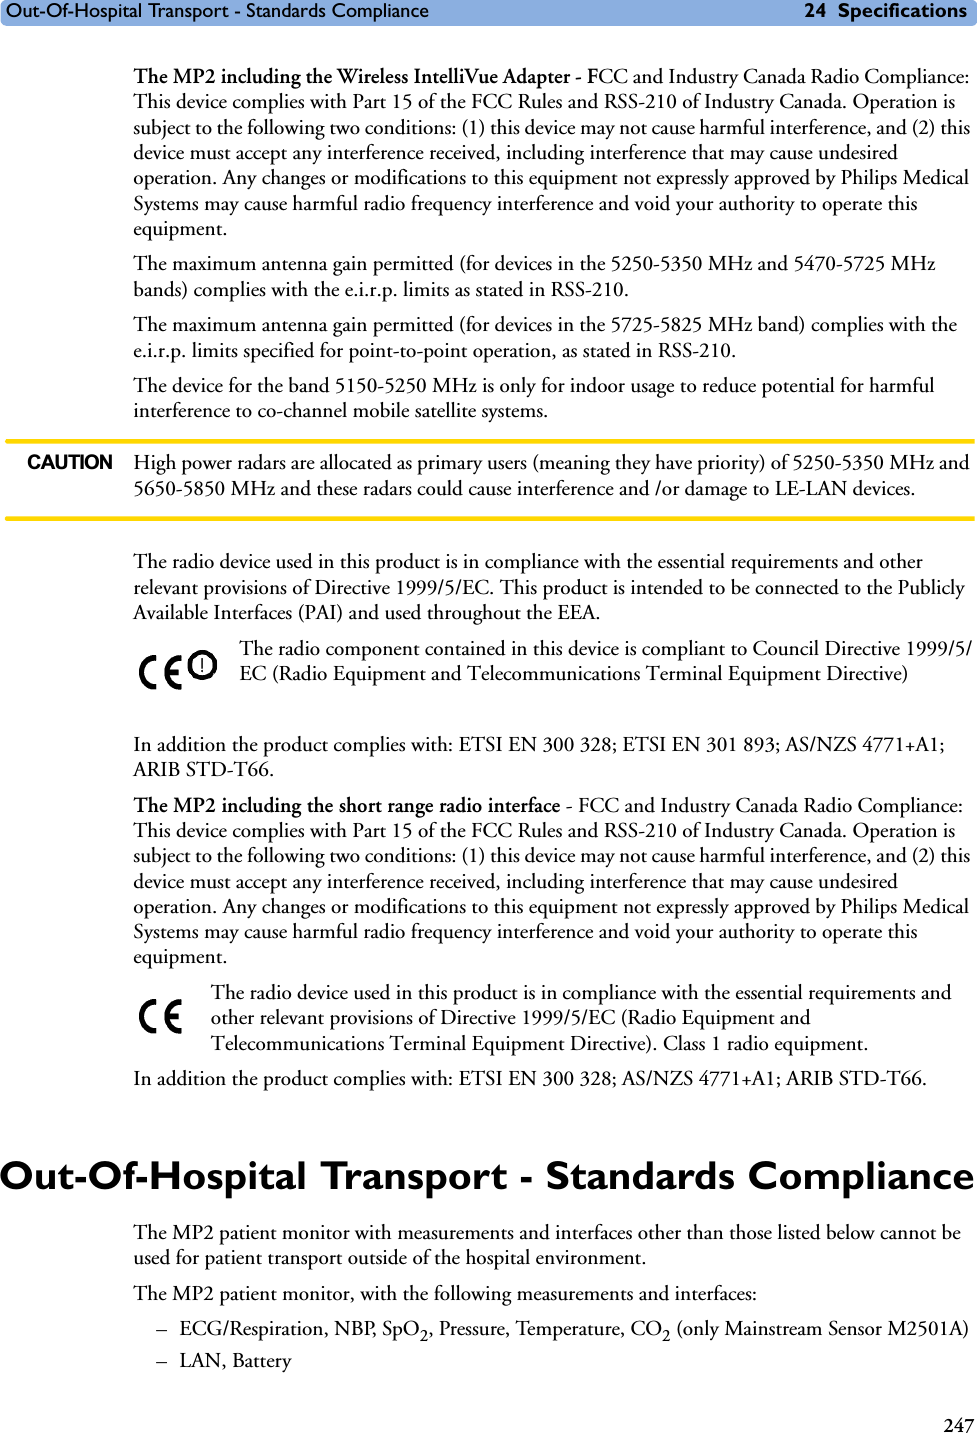 Out-Of-Hospital Transport - Standards Compliance 24 Specifications247The MP2 including the Wireless IntelliVue Adapter - FCC and Industry Canada Radio Compliance: This device complies with Part 15 of the FCC Rules and RSS-210 of Industry Canada. Operation is subject to the following two conditions: (1) this device may not cause harmful interference, and (2) this device must accept any interference received, including interference that may cause undesired operation. Any changes or modifications to this equipment not expressly approved by Philips Medical Systems may cause harmful radio frequency interference and void your authority to operate this equipment.The maximum antenna gain permitted (for devices in the 5250-5350 MHz and 5470-5725 MHz bands) complies with the e.i.r.p. limits as stated in RSS-210.The maximum antenna gain permitted (for devices in the 5725-5825 MHz band) complies with the e.i.r.p. limits specified for point-to-point operation, as stated in RSS-210.The device for the band 5150-5250 MHz is only for indoor usage to reduce potential for harmful interference to co-channel mobile satellite systems.CAUTION High power radars are allocated as primary users (meaning they have priority) of 5250-5350 MHz and 5650-5850 MHz and these radars could cause interference and /or damage to LE-LAN devices.The radio device used in this product is in compliance with the essential requirements and other relevant provisions of Directive 1999/5/EC. This product is intended to be connected to the Publicly Available Interfaces (PAI) and used throughout the EEA.The radio component contained in this device is compliant to Council Directive 1999/5/EC (Radio Equipment and Telecommunications Terminal Equipment Directive)In addition the product complies with: ETSI EN 300 328; ETSI EN 301 893; AS/NZS 4771+A1; ARIB STD-T66.The MP2 including the short range radio interface - FCC and Industry Canada Radio Compliance: This device complies with Part 15 of the FCC Rules and RSS-210 of Industry Canada. Operation is subject to the following two conditions: (1) this device may not cause harmful interference, and (2) this device must accept any interference received, including interference that may cause undesired operation. Any changes or modifications to this equipment not expressly approved by Philips Medical Systems may cause harmful radio frequency interference and void your authority to operate this equipment.The radio device used in this product is in compliance with the essential requirements and other relevant provisions of Directive 1999/5/EC (Radio Equipment and Telecommunications Terminal Equipment Directive). Class 1 radio equipment. In addition the product complies with: ETSI EN 300 328; AS/NZS 4771+A1; ARIB STD-T66.Out-Of-Hospital Transport - Standards ComplianceThe MP2 patient monitor with measurements and interfaces other than those listed below cannot be used for patient transport outside of the hospital environment.The MP2 patient monitor, with the following measurements and interfaces:–ECG/Respiration, NBP, SpO2, Pressure, Temperature, CO2 (only Mainstream Sensor M2501A)– LAN, Battery